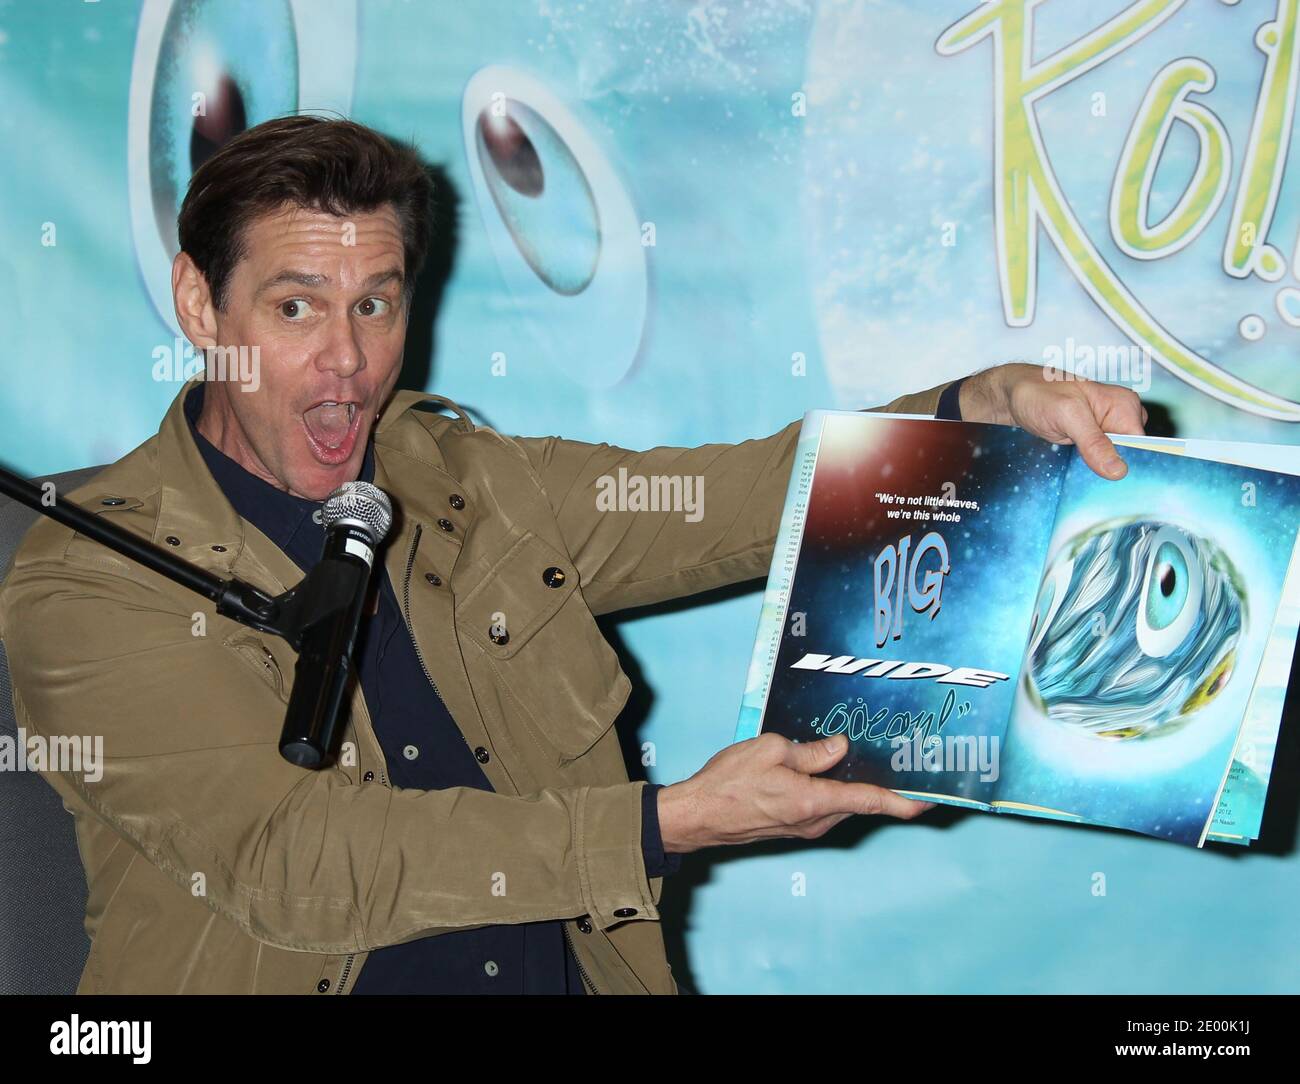 Actor and author Jim Carrey reads from his new children's book 'How Roland  Rolls' at Barnes & Noble bookstore at The Grove in Los Angeles, CA, USA on  October 26, 2013. 'How